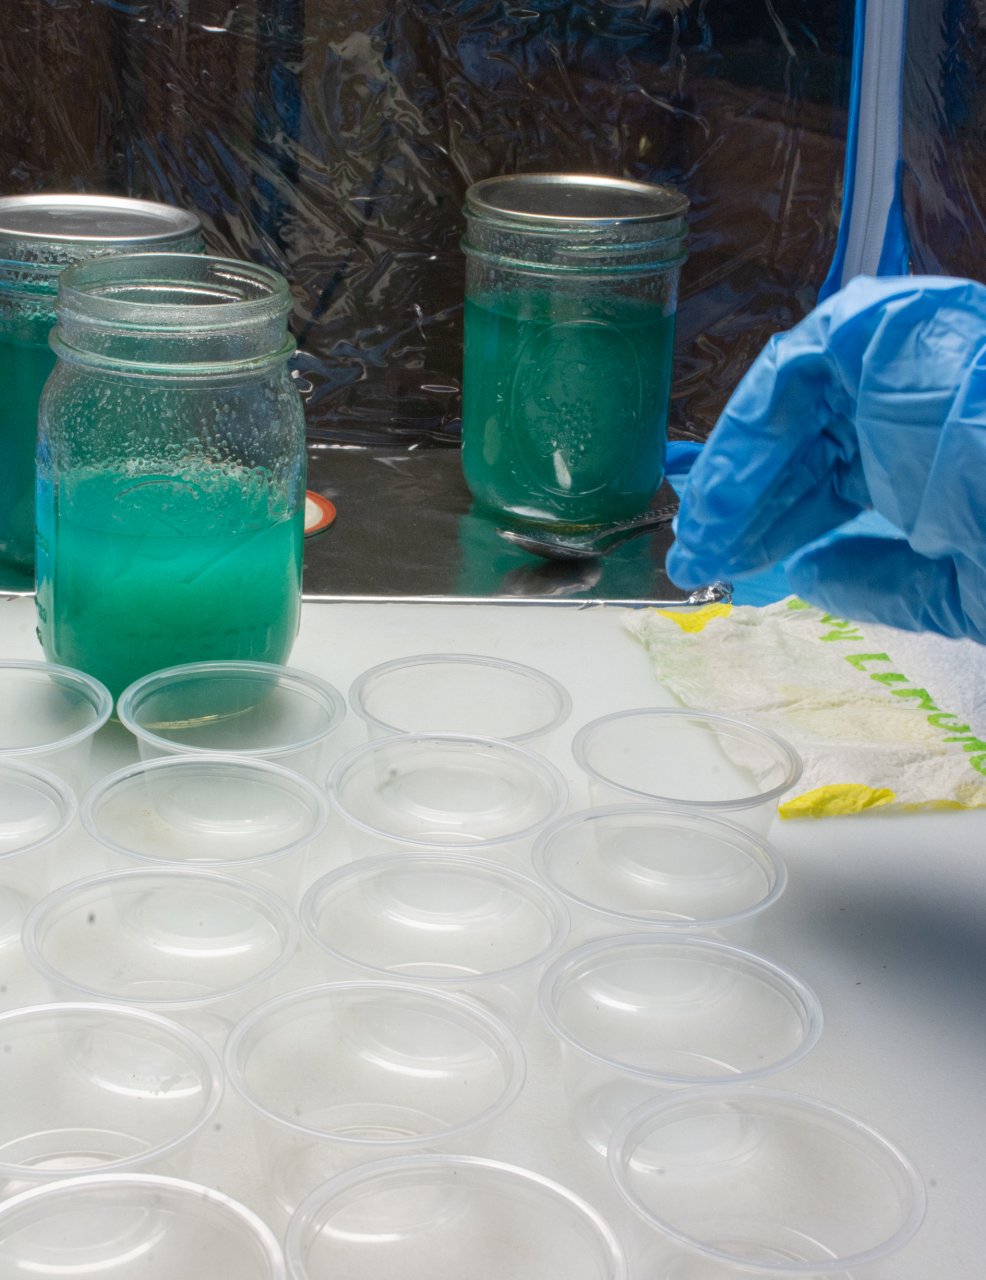 Agar plates in condiiment containers-2.jpg